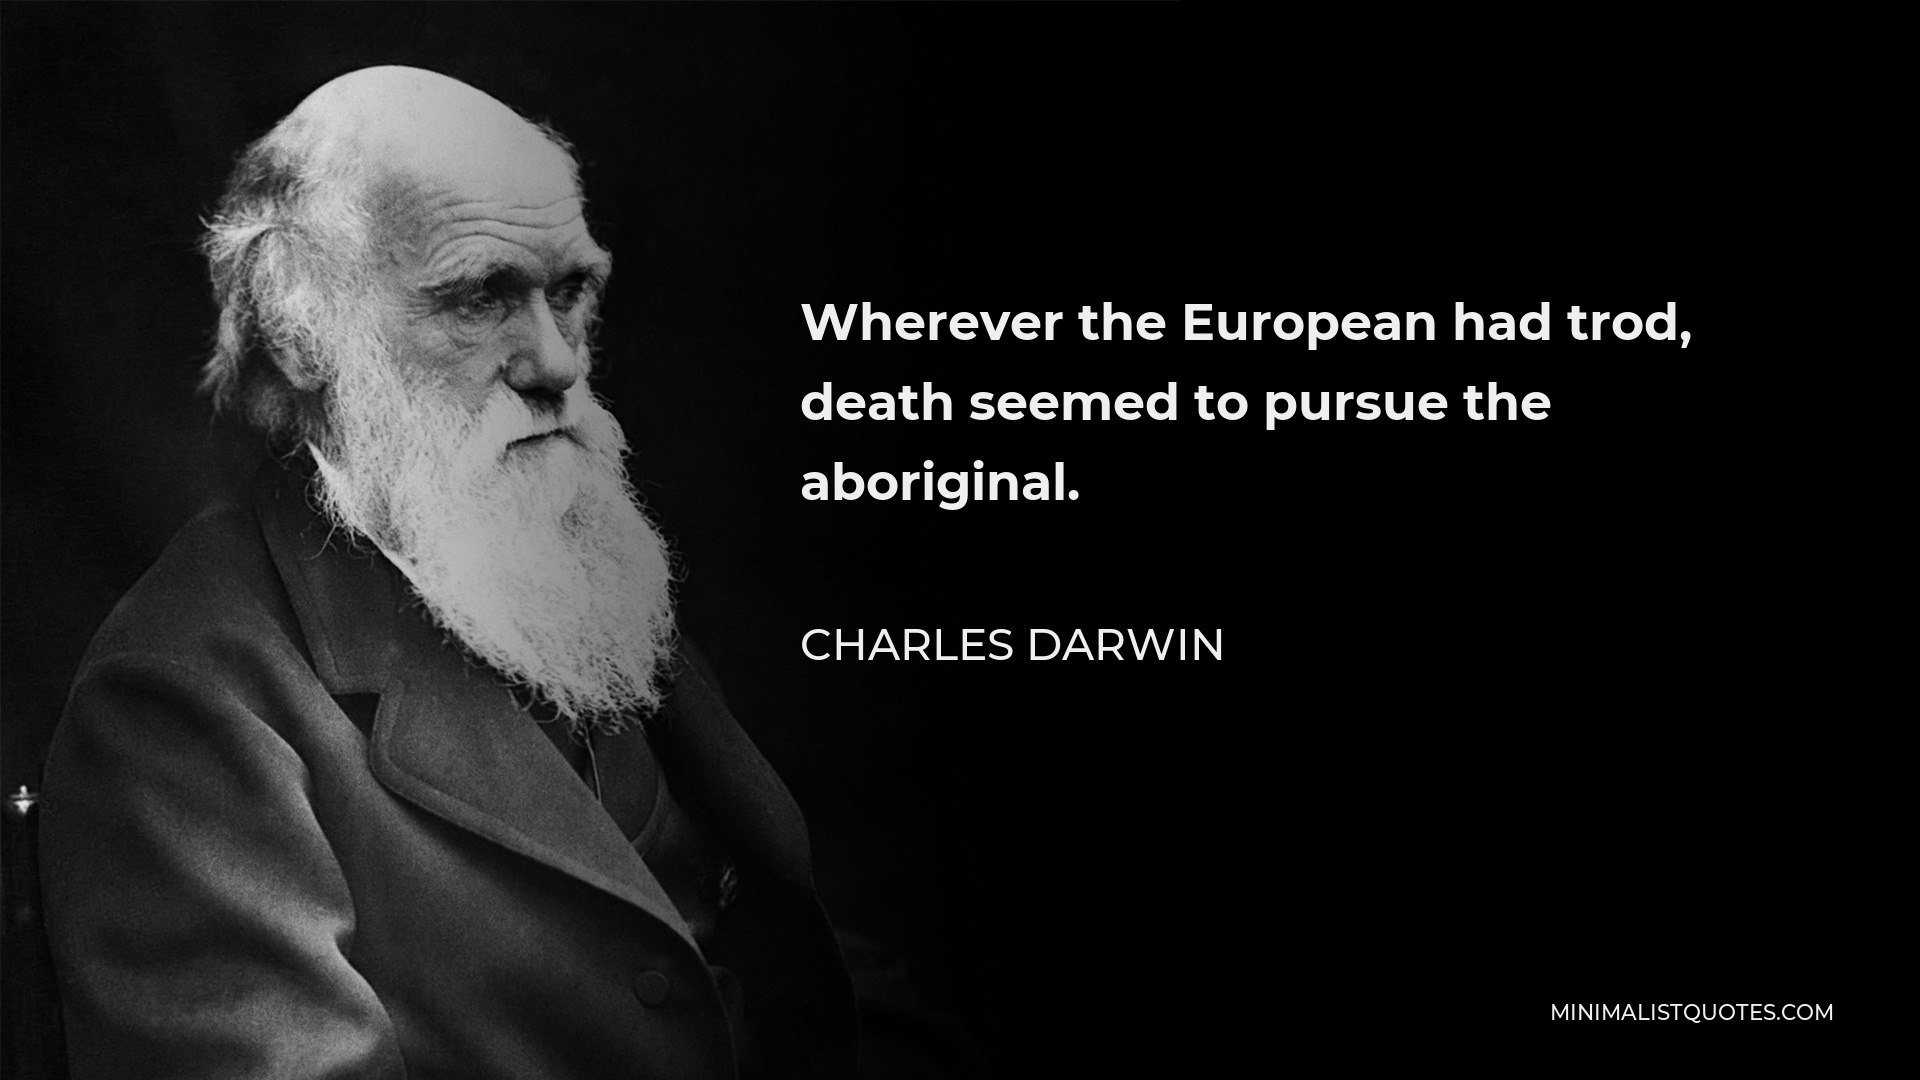 Charles Darwin Quote - Wherever the European had trod, death seemed to pursue the aboriginal.